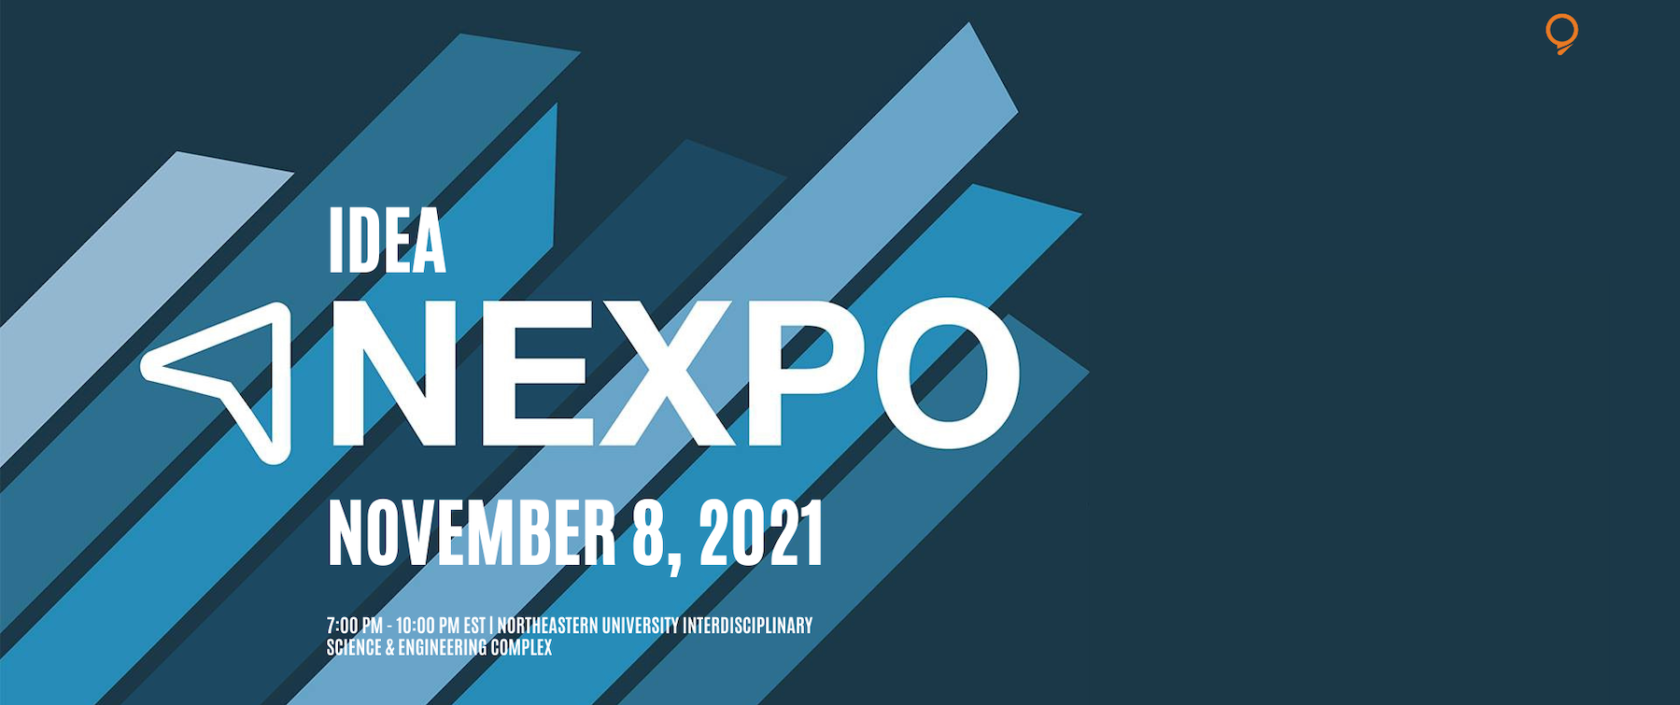 IDEA NEXPO header with event date, time, and location